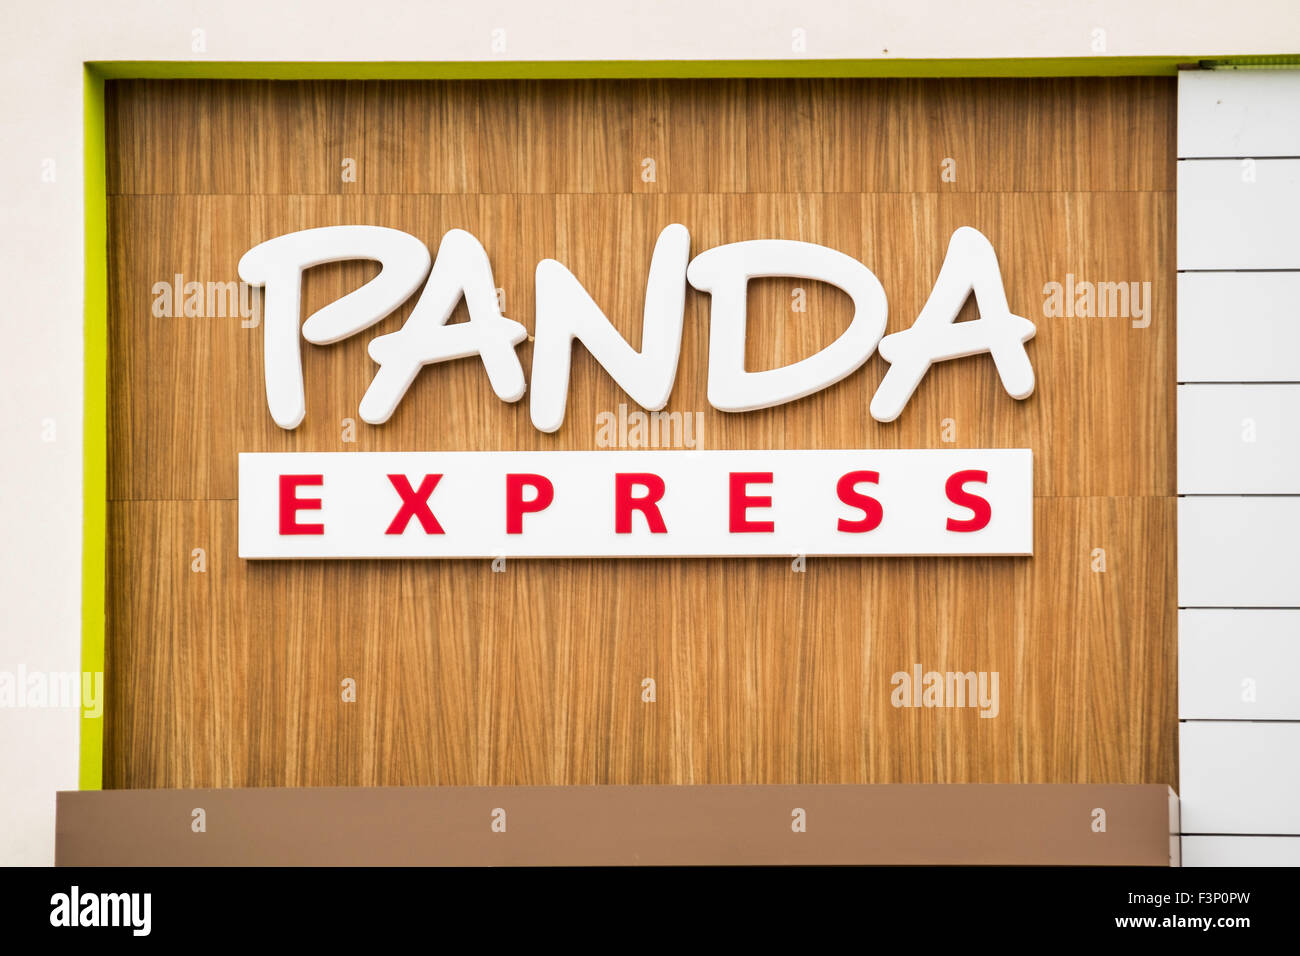 The exterior sign and logo of Panda Express, a chain Chinese restaurant serving fast meals in Oklahoma Cily, Oklahoma, USA. Stock Photo